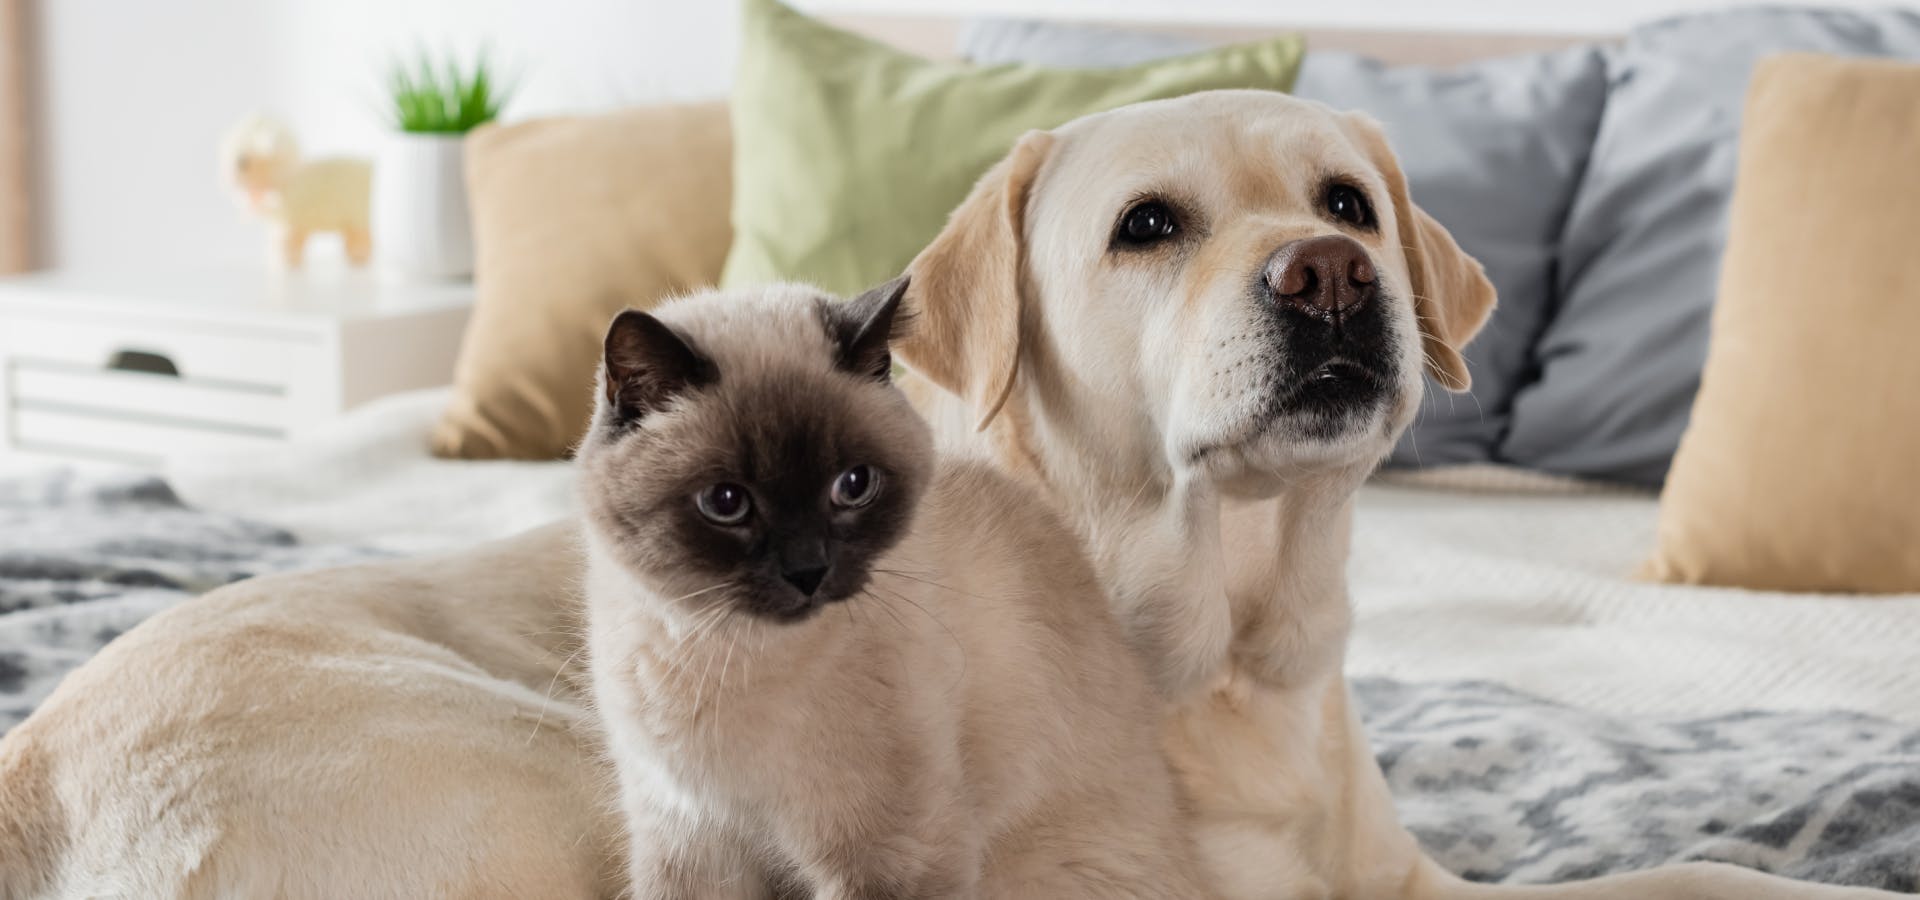 A cat and a dog sitting on a bed